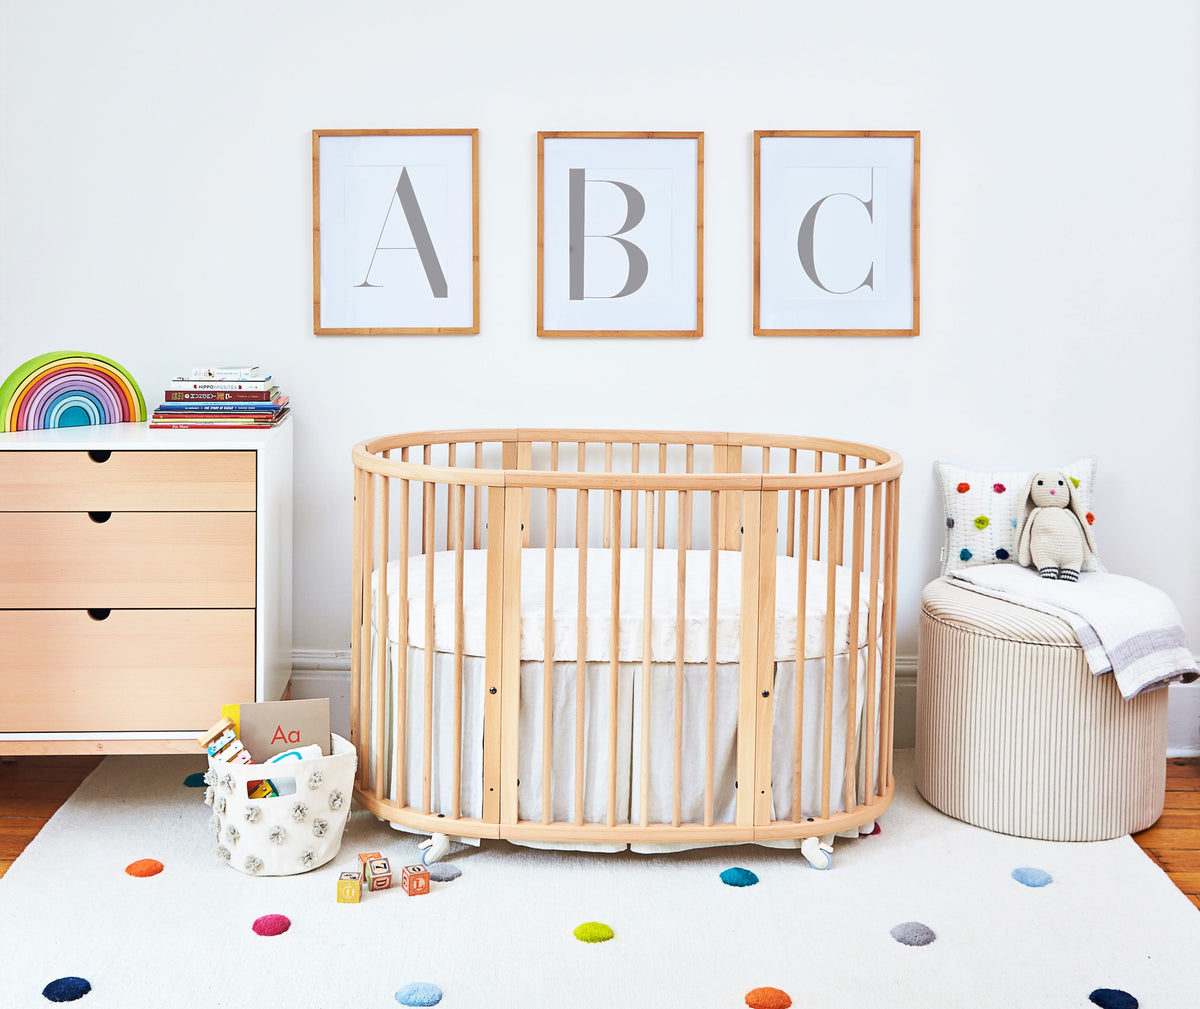 stokke round cot